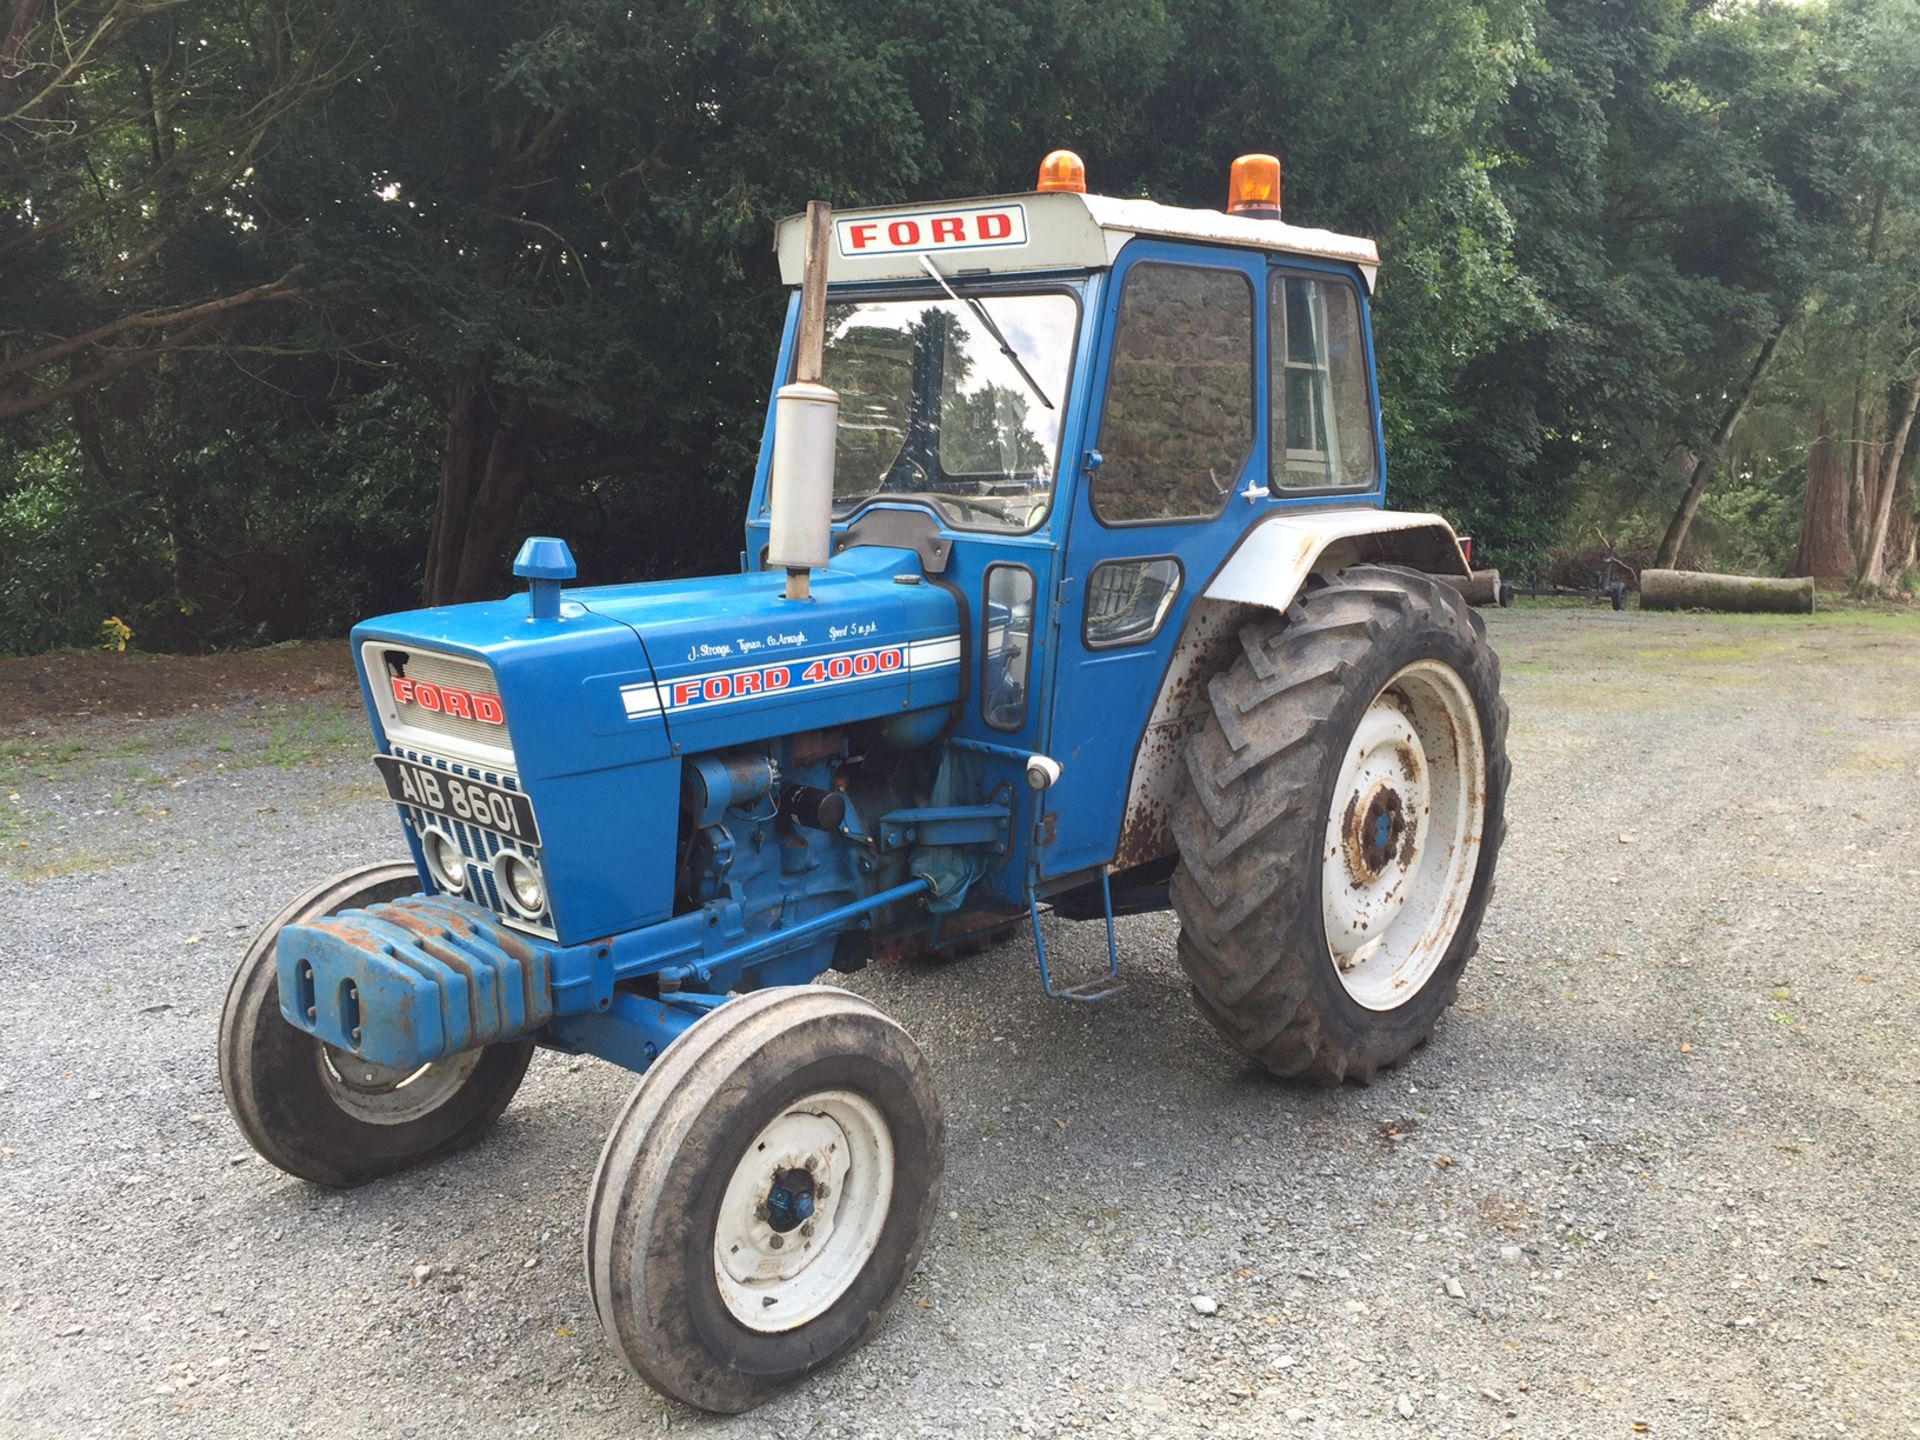 1974 FORD 4000 4cylinder diesel TRACTOR Reg No: AIB 8601 (Irish) Serial No: BP34662 Fitted with a - Image 2 of 7